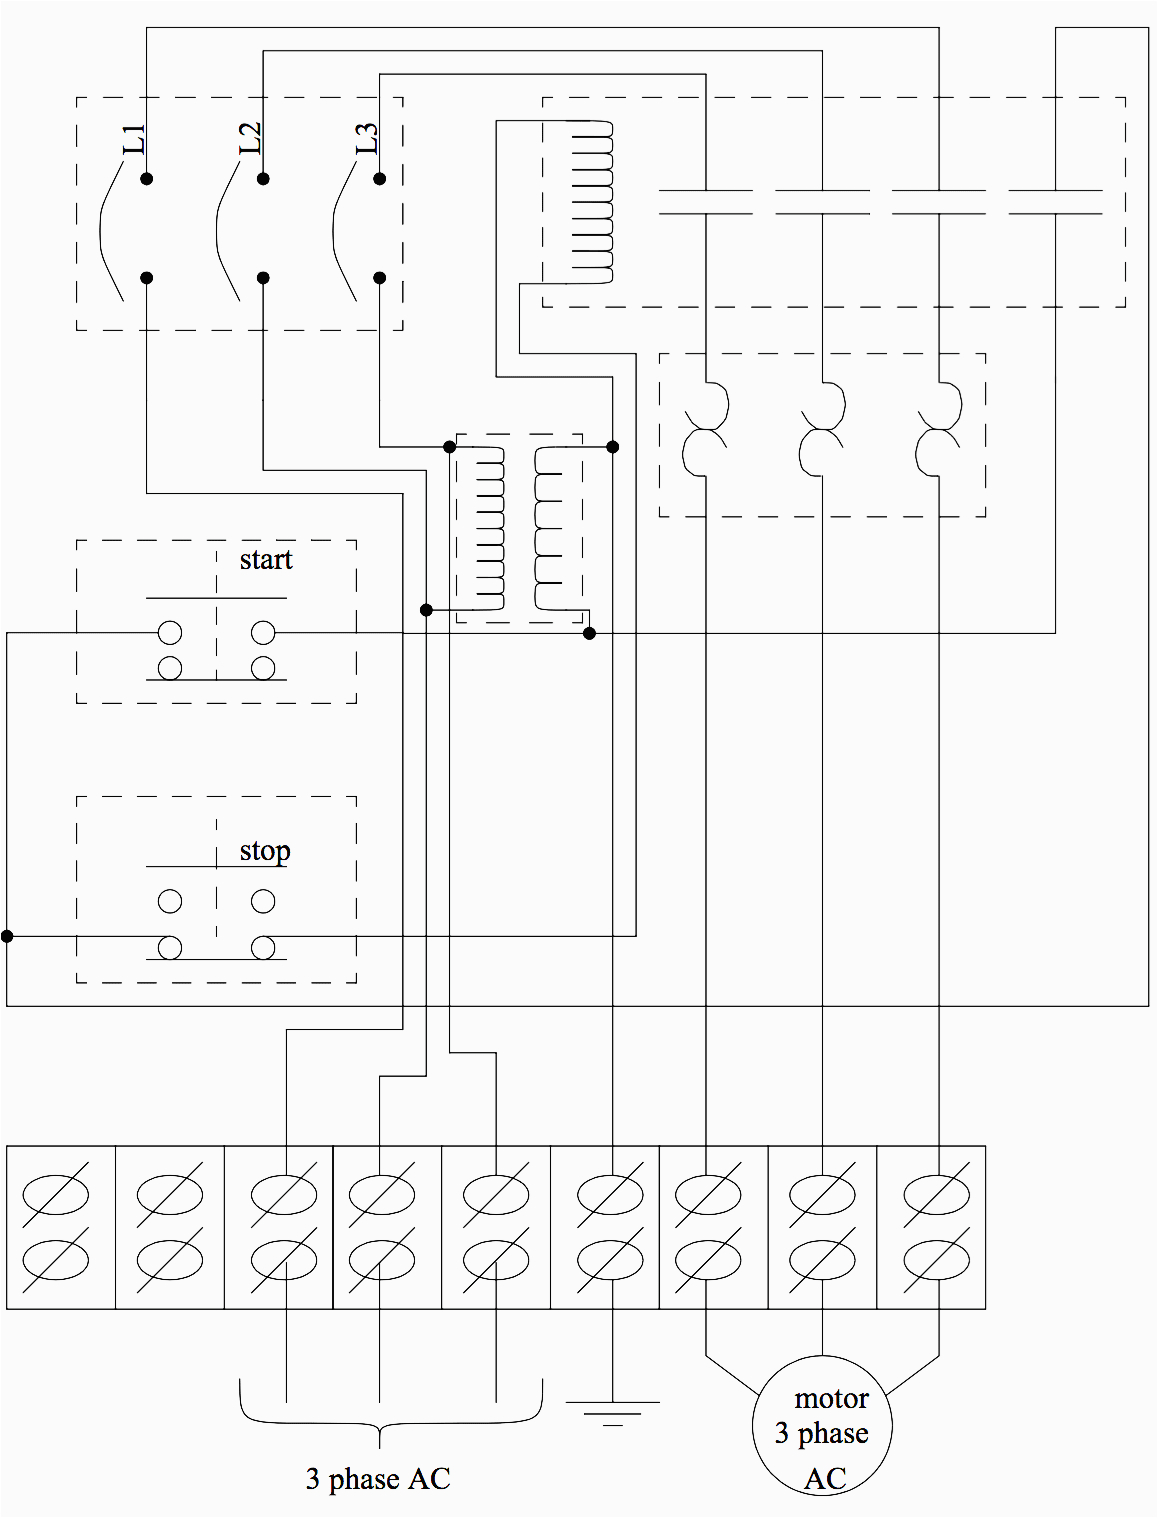 basic electrical design of a plc panel wiring diagrams eep dcs panel wiring diagram pdf